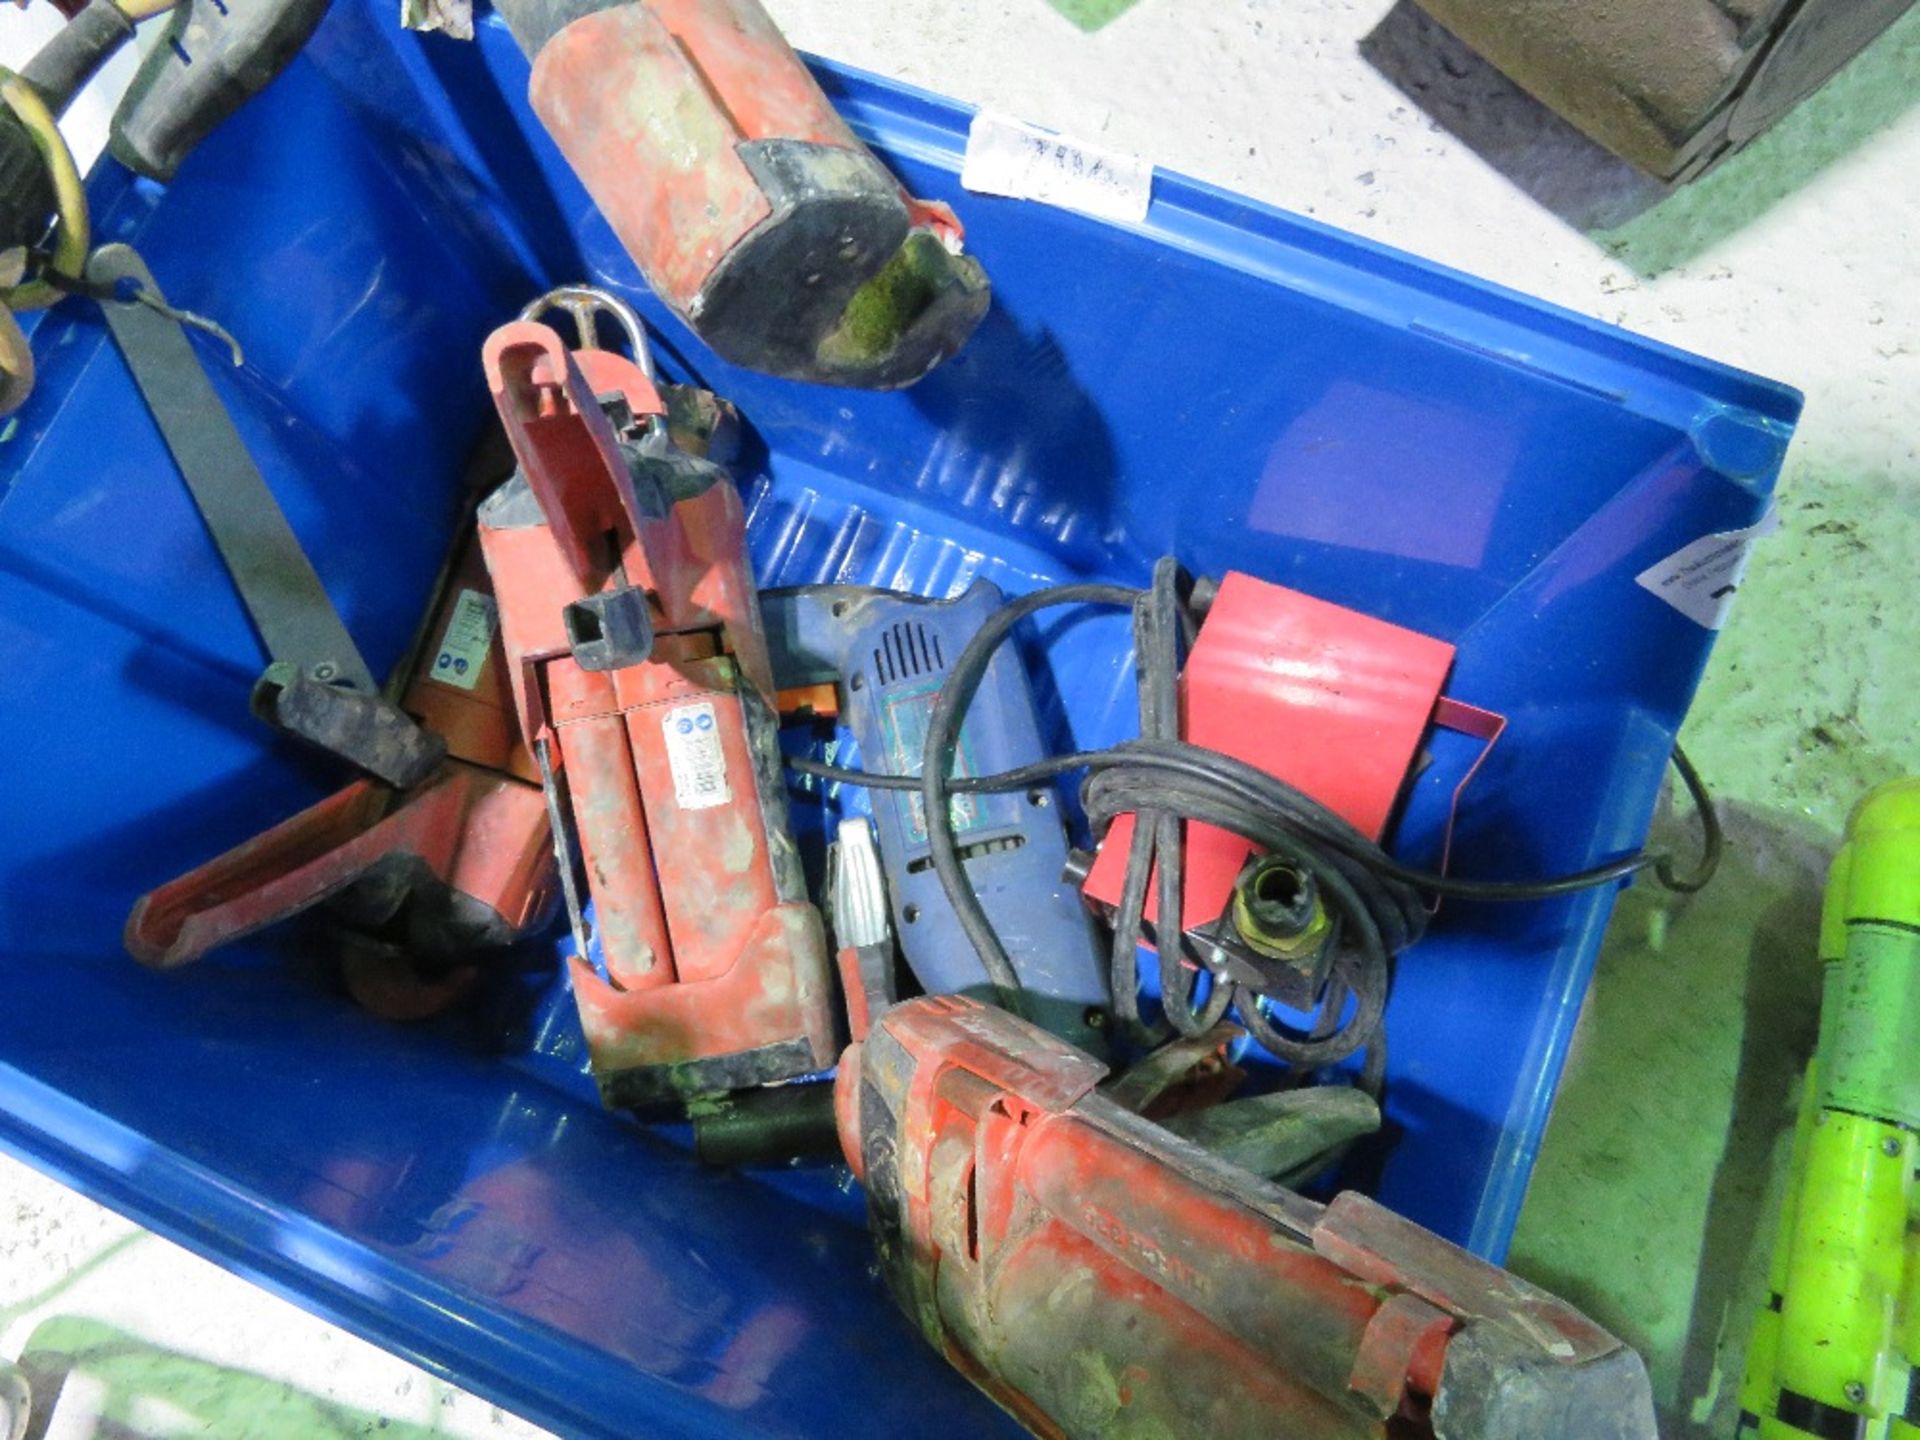 4 X HILTI MASTIC GUNS PLUS POWER TOOLS. SOURCED FROM COMPANY LIQUIDATION. THIS LOT IS SOLD UNDER - Image 4 of 7